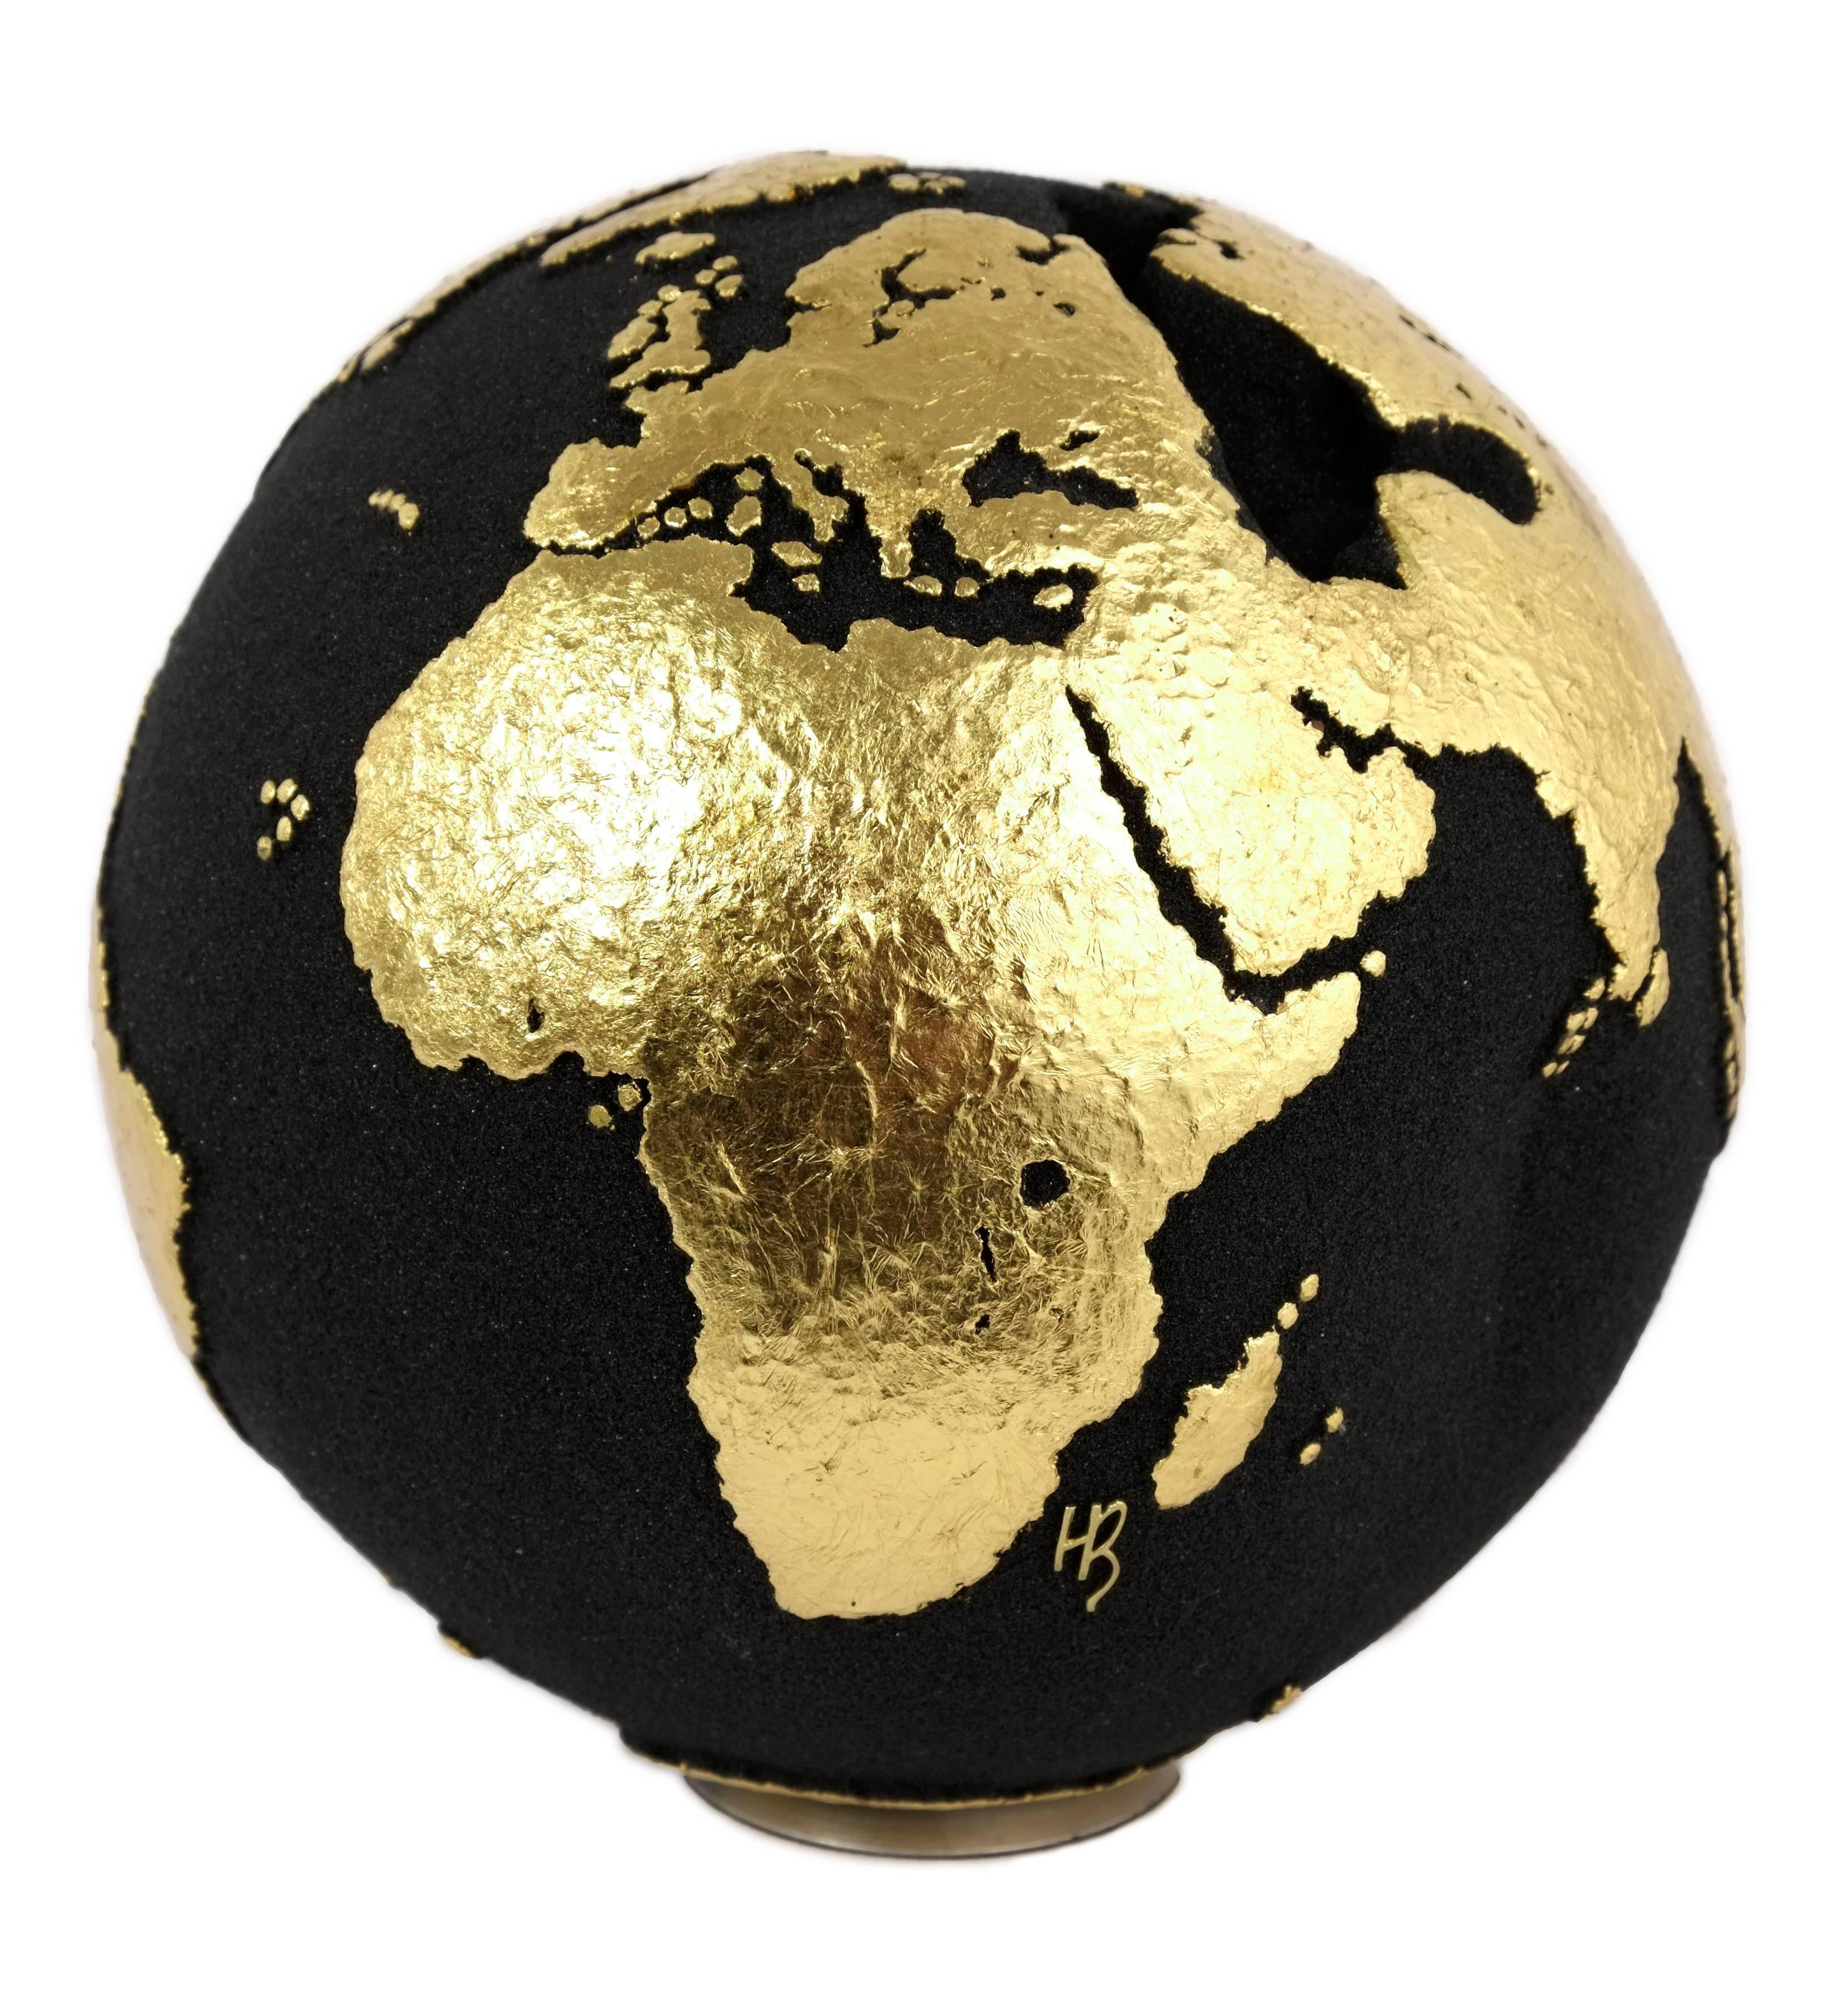 Say it with gold.

Adorable little handcrafted wooden globe made of teak root and volcanic sand, with 23-carat gold leaf finishing. A certainly ideal piece as gifts for friends, loved ones, or for yourself.

Dimension: 9.84 in / 20